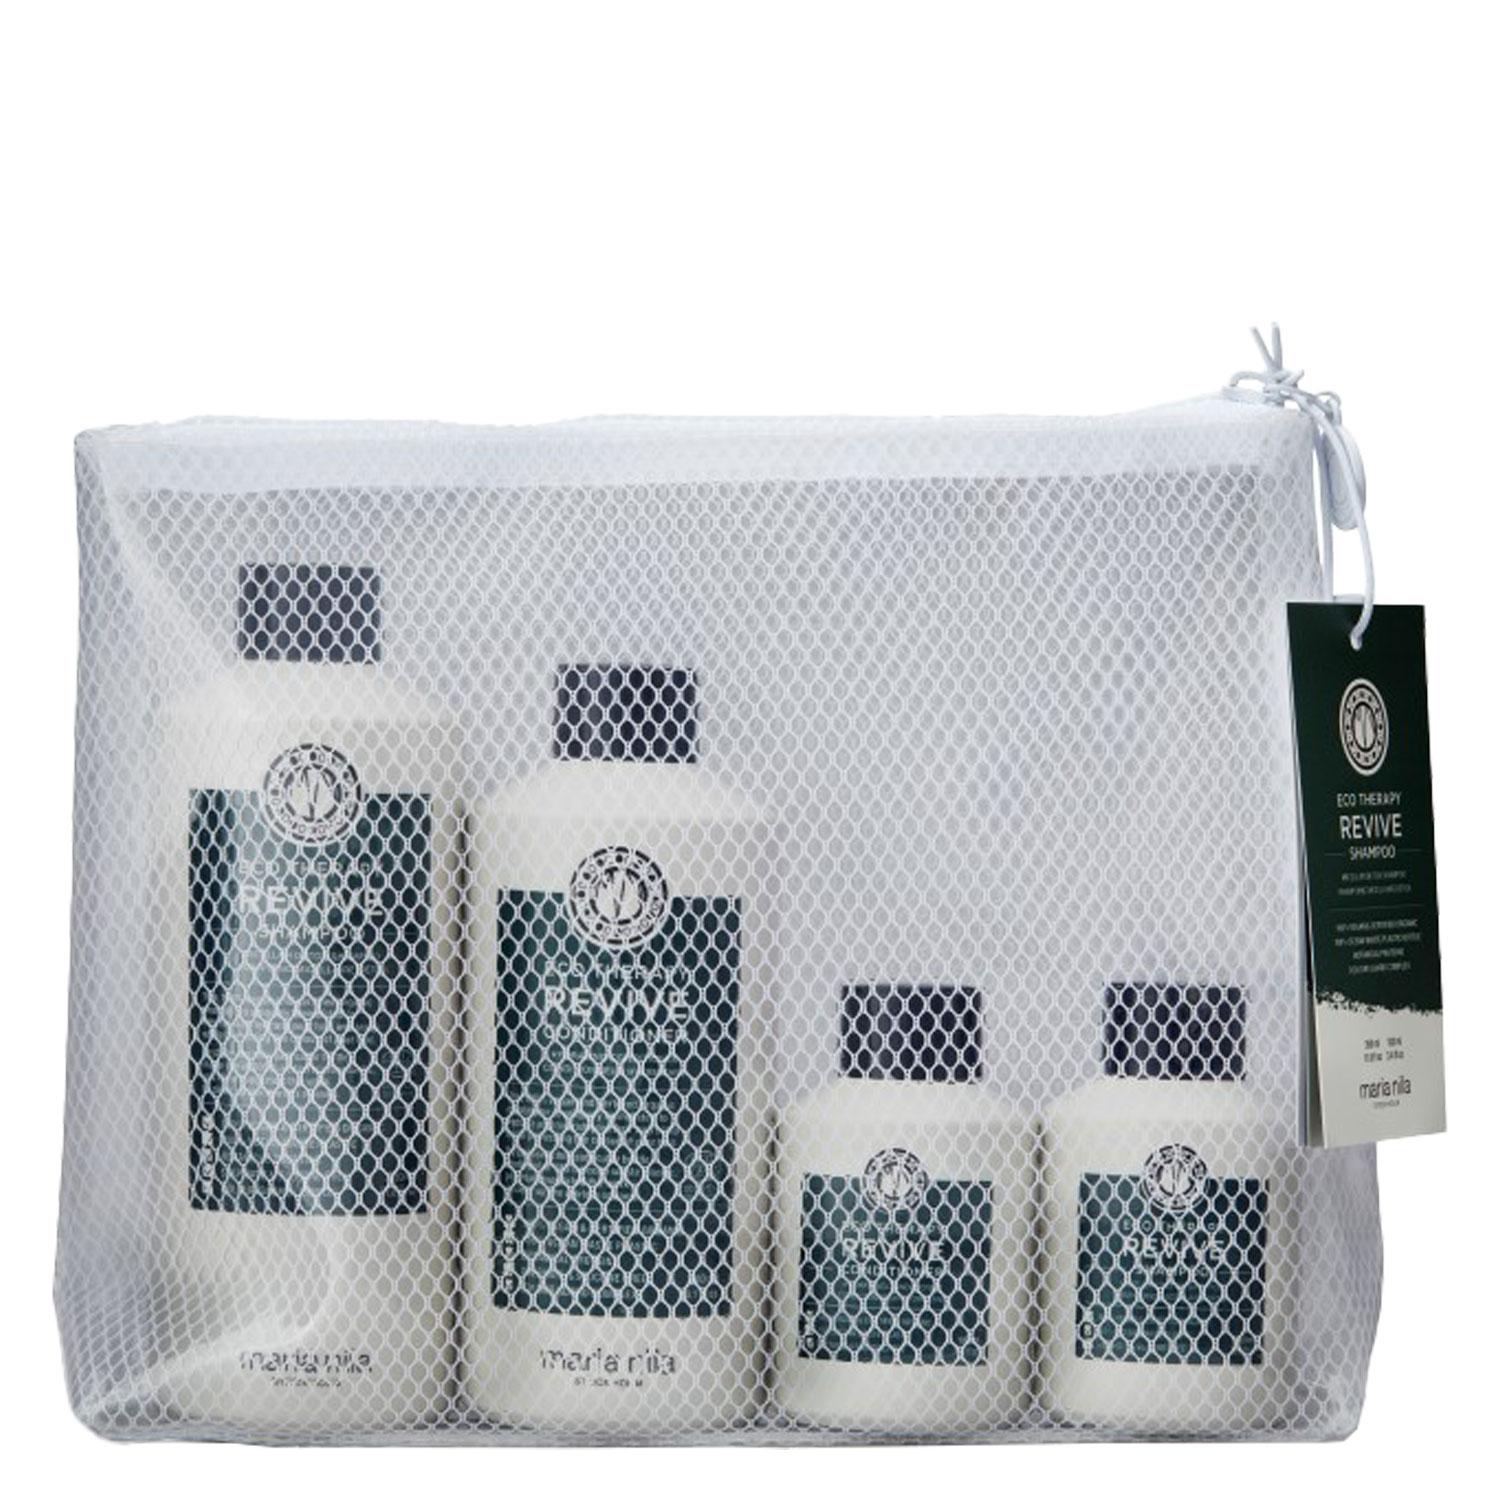 Care & Style - Eco Therapy Revive Beauty Bag